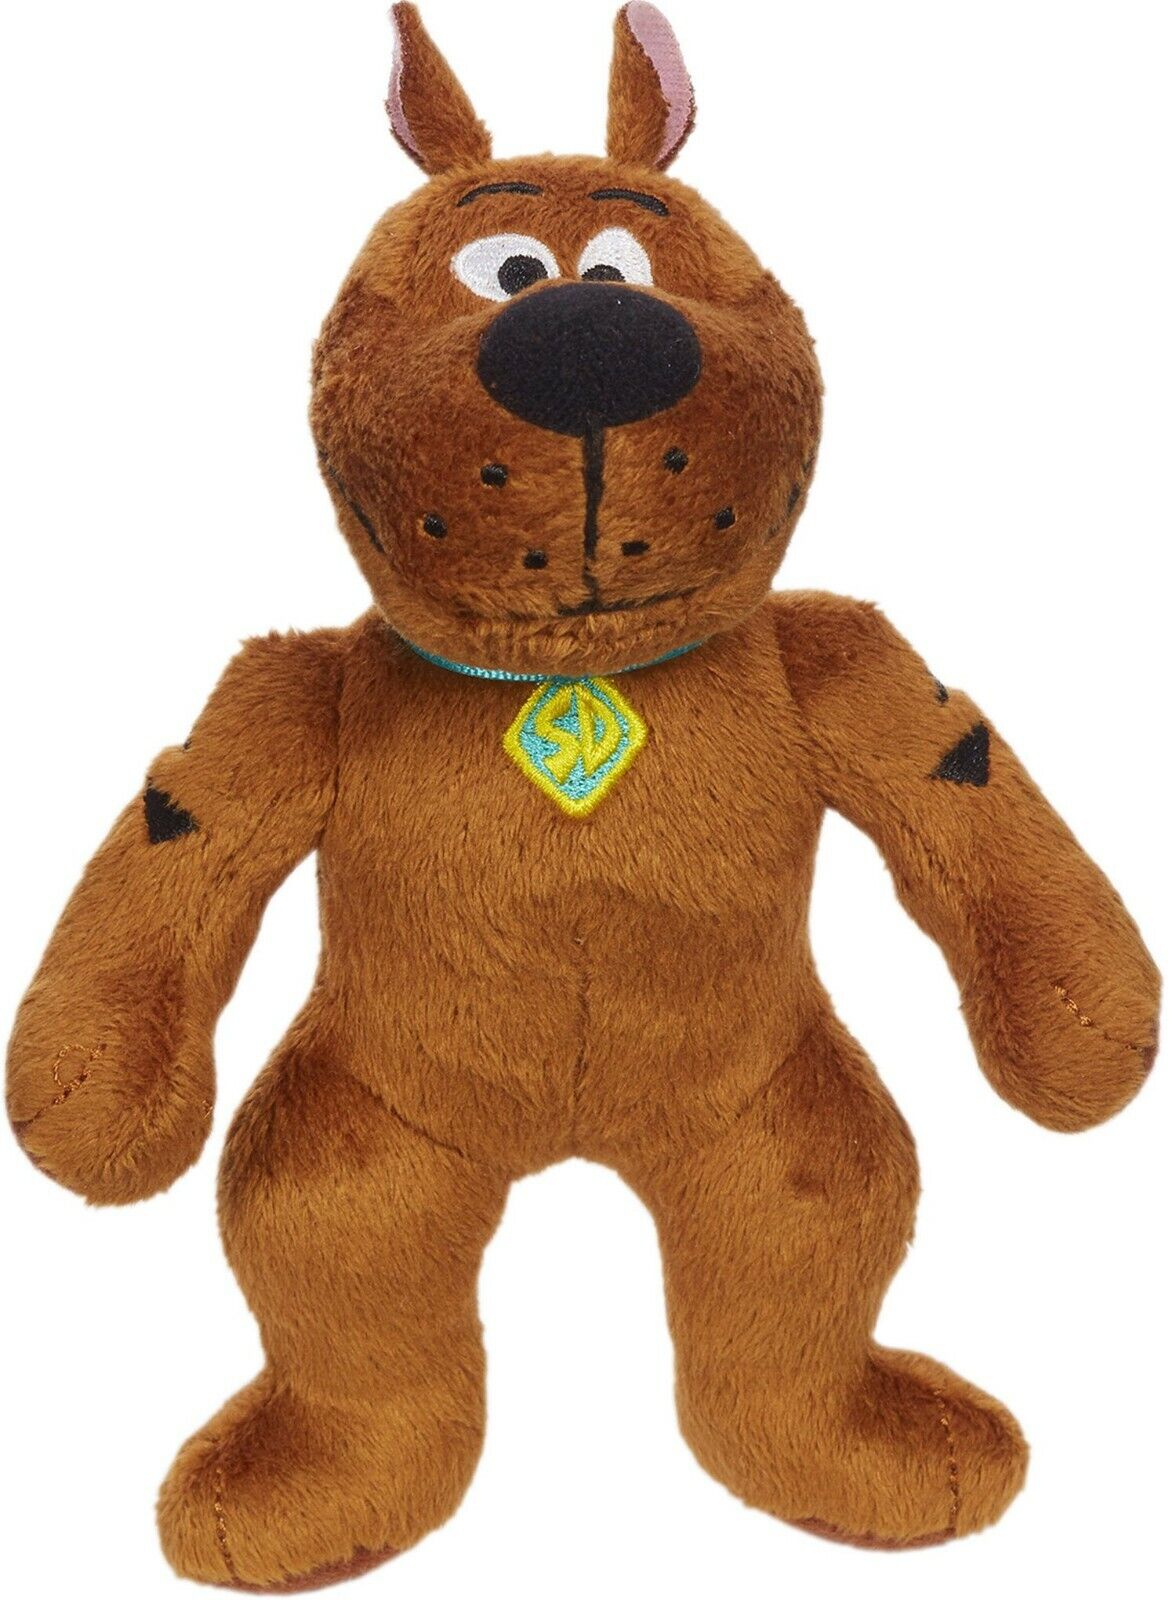 Scoob 7-Inch Plush Collectables Scooby-Doo or Super Scooby